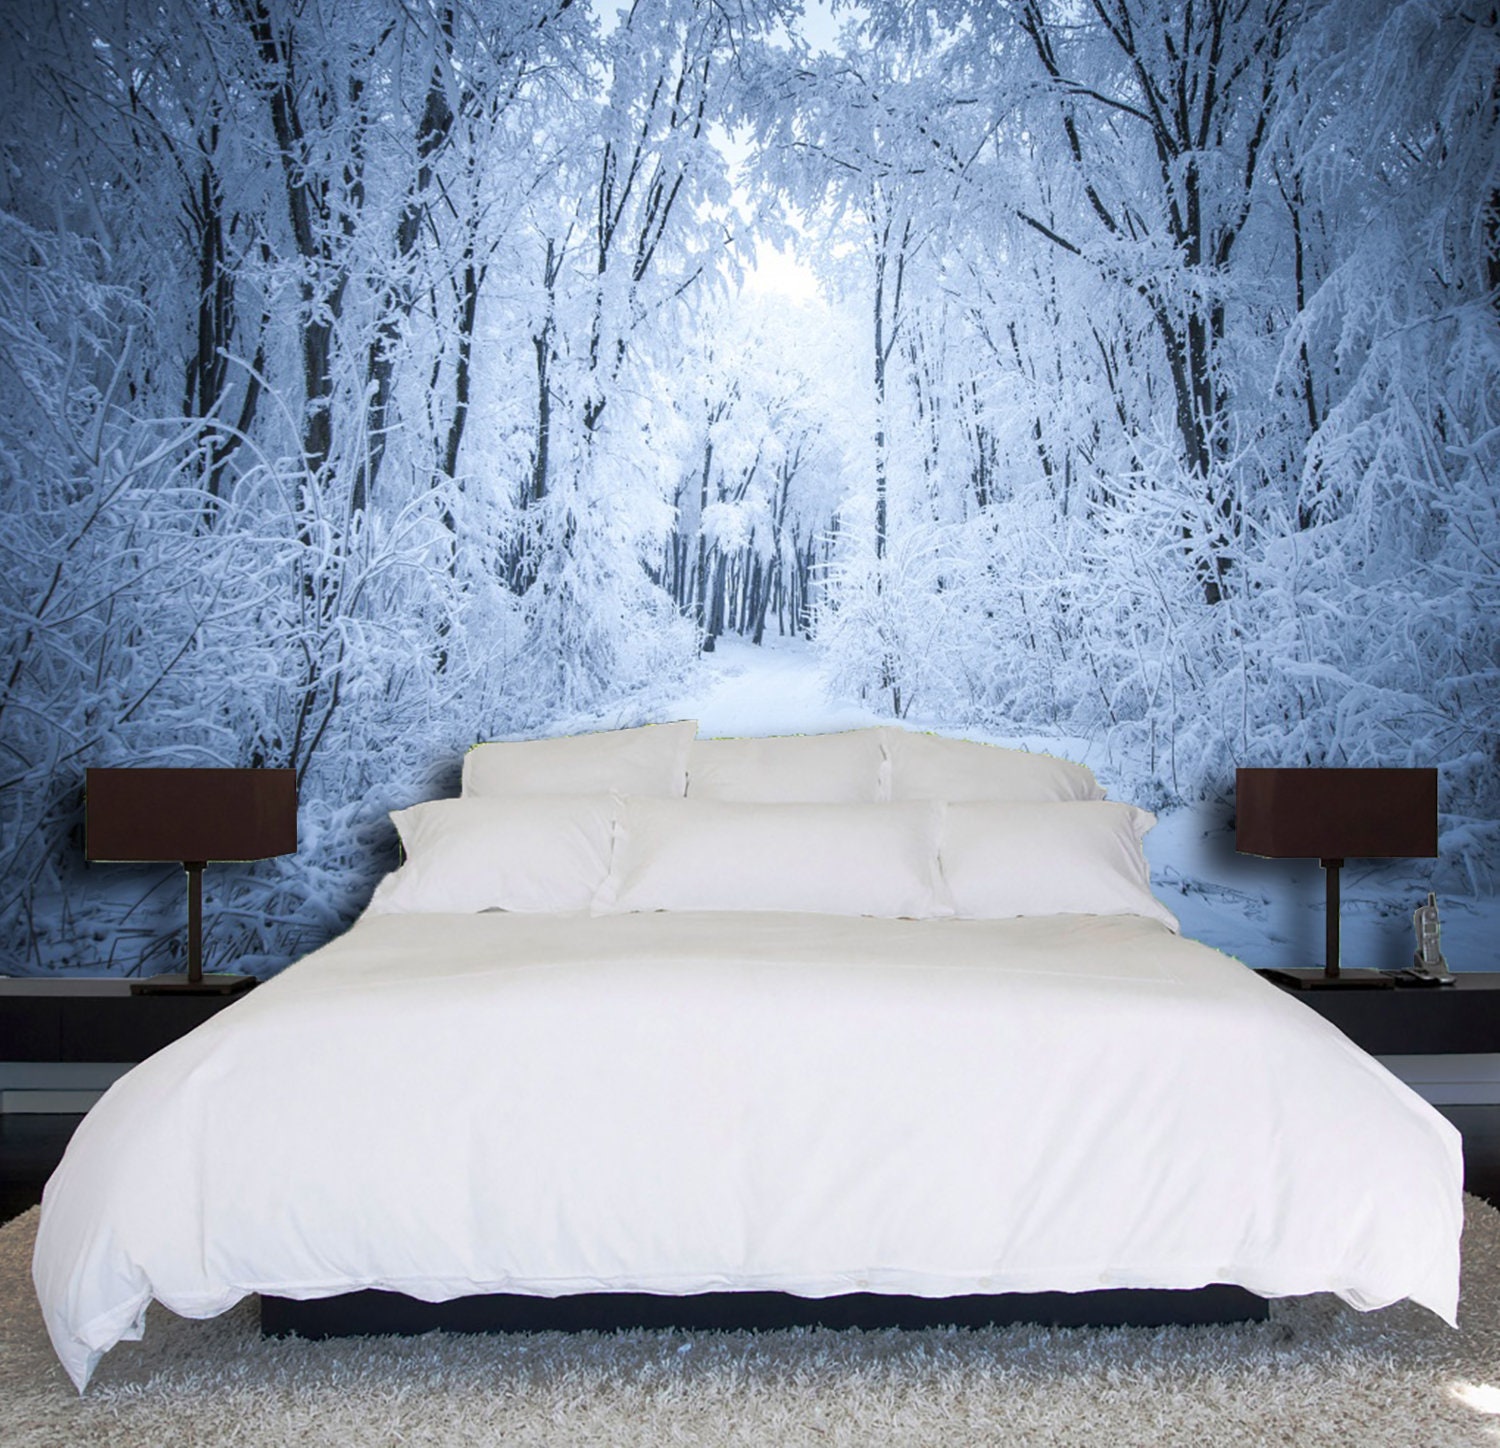 Snow Forest 2015 Wallpaper Mural Self Adhesive Peel And Stick Etsy